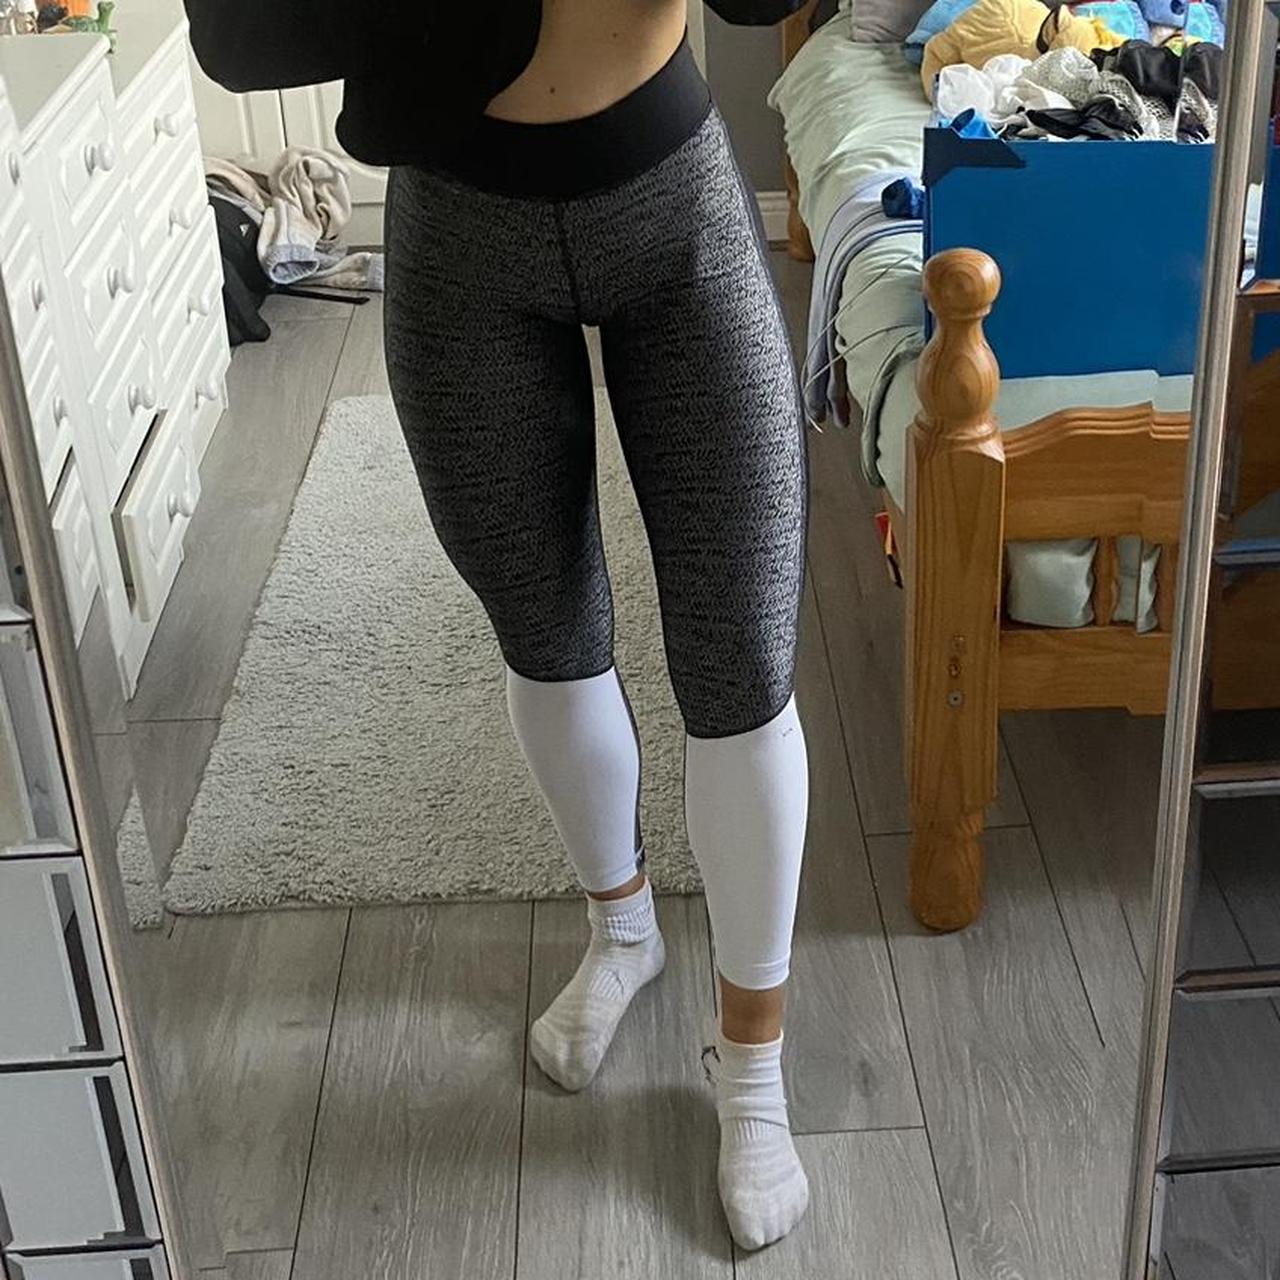 Under armour leggings black/grey and white Size xs - Depop